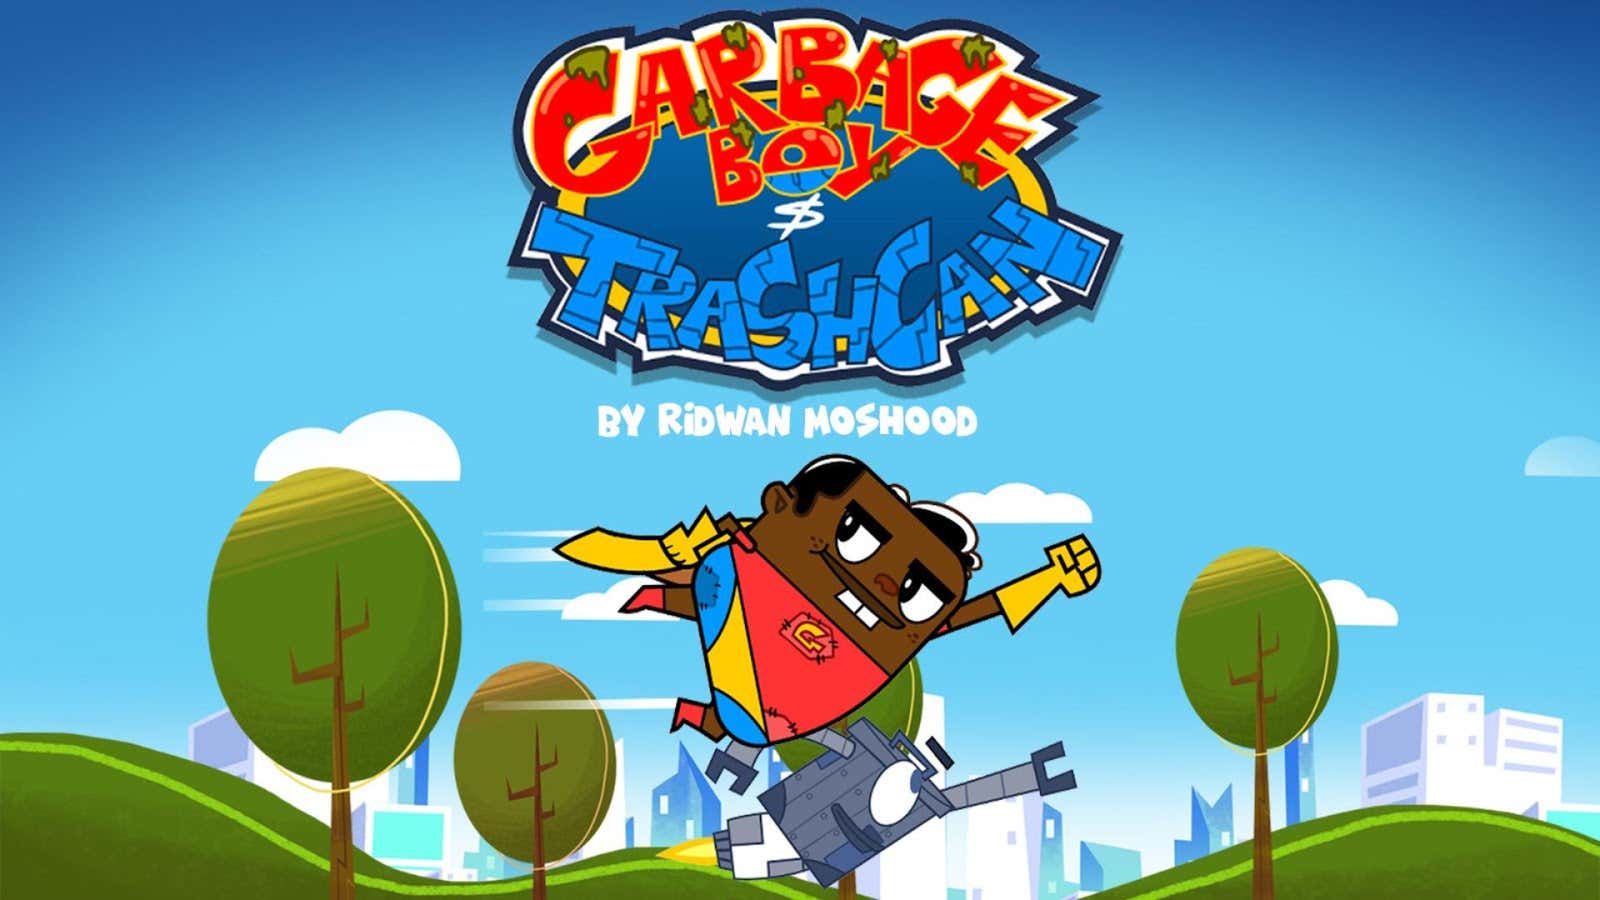 ‘Garbage Boy and Trash Can’ will be Cartoon Network’s first animated comedy series to be produced in Africa.